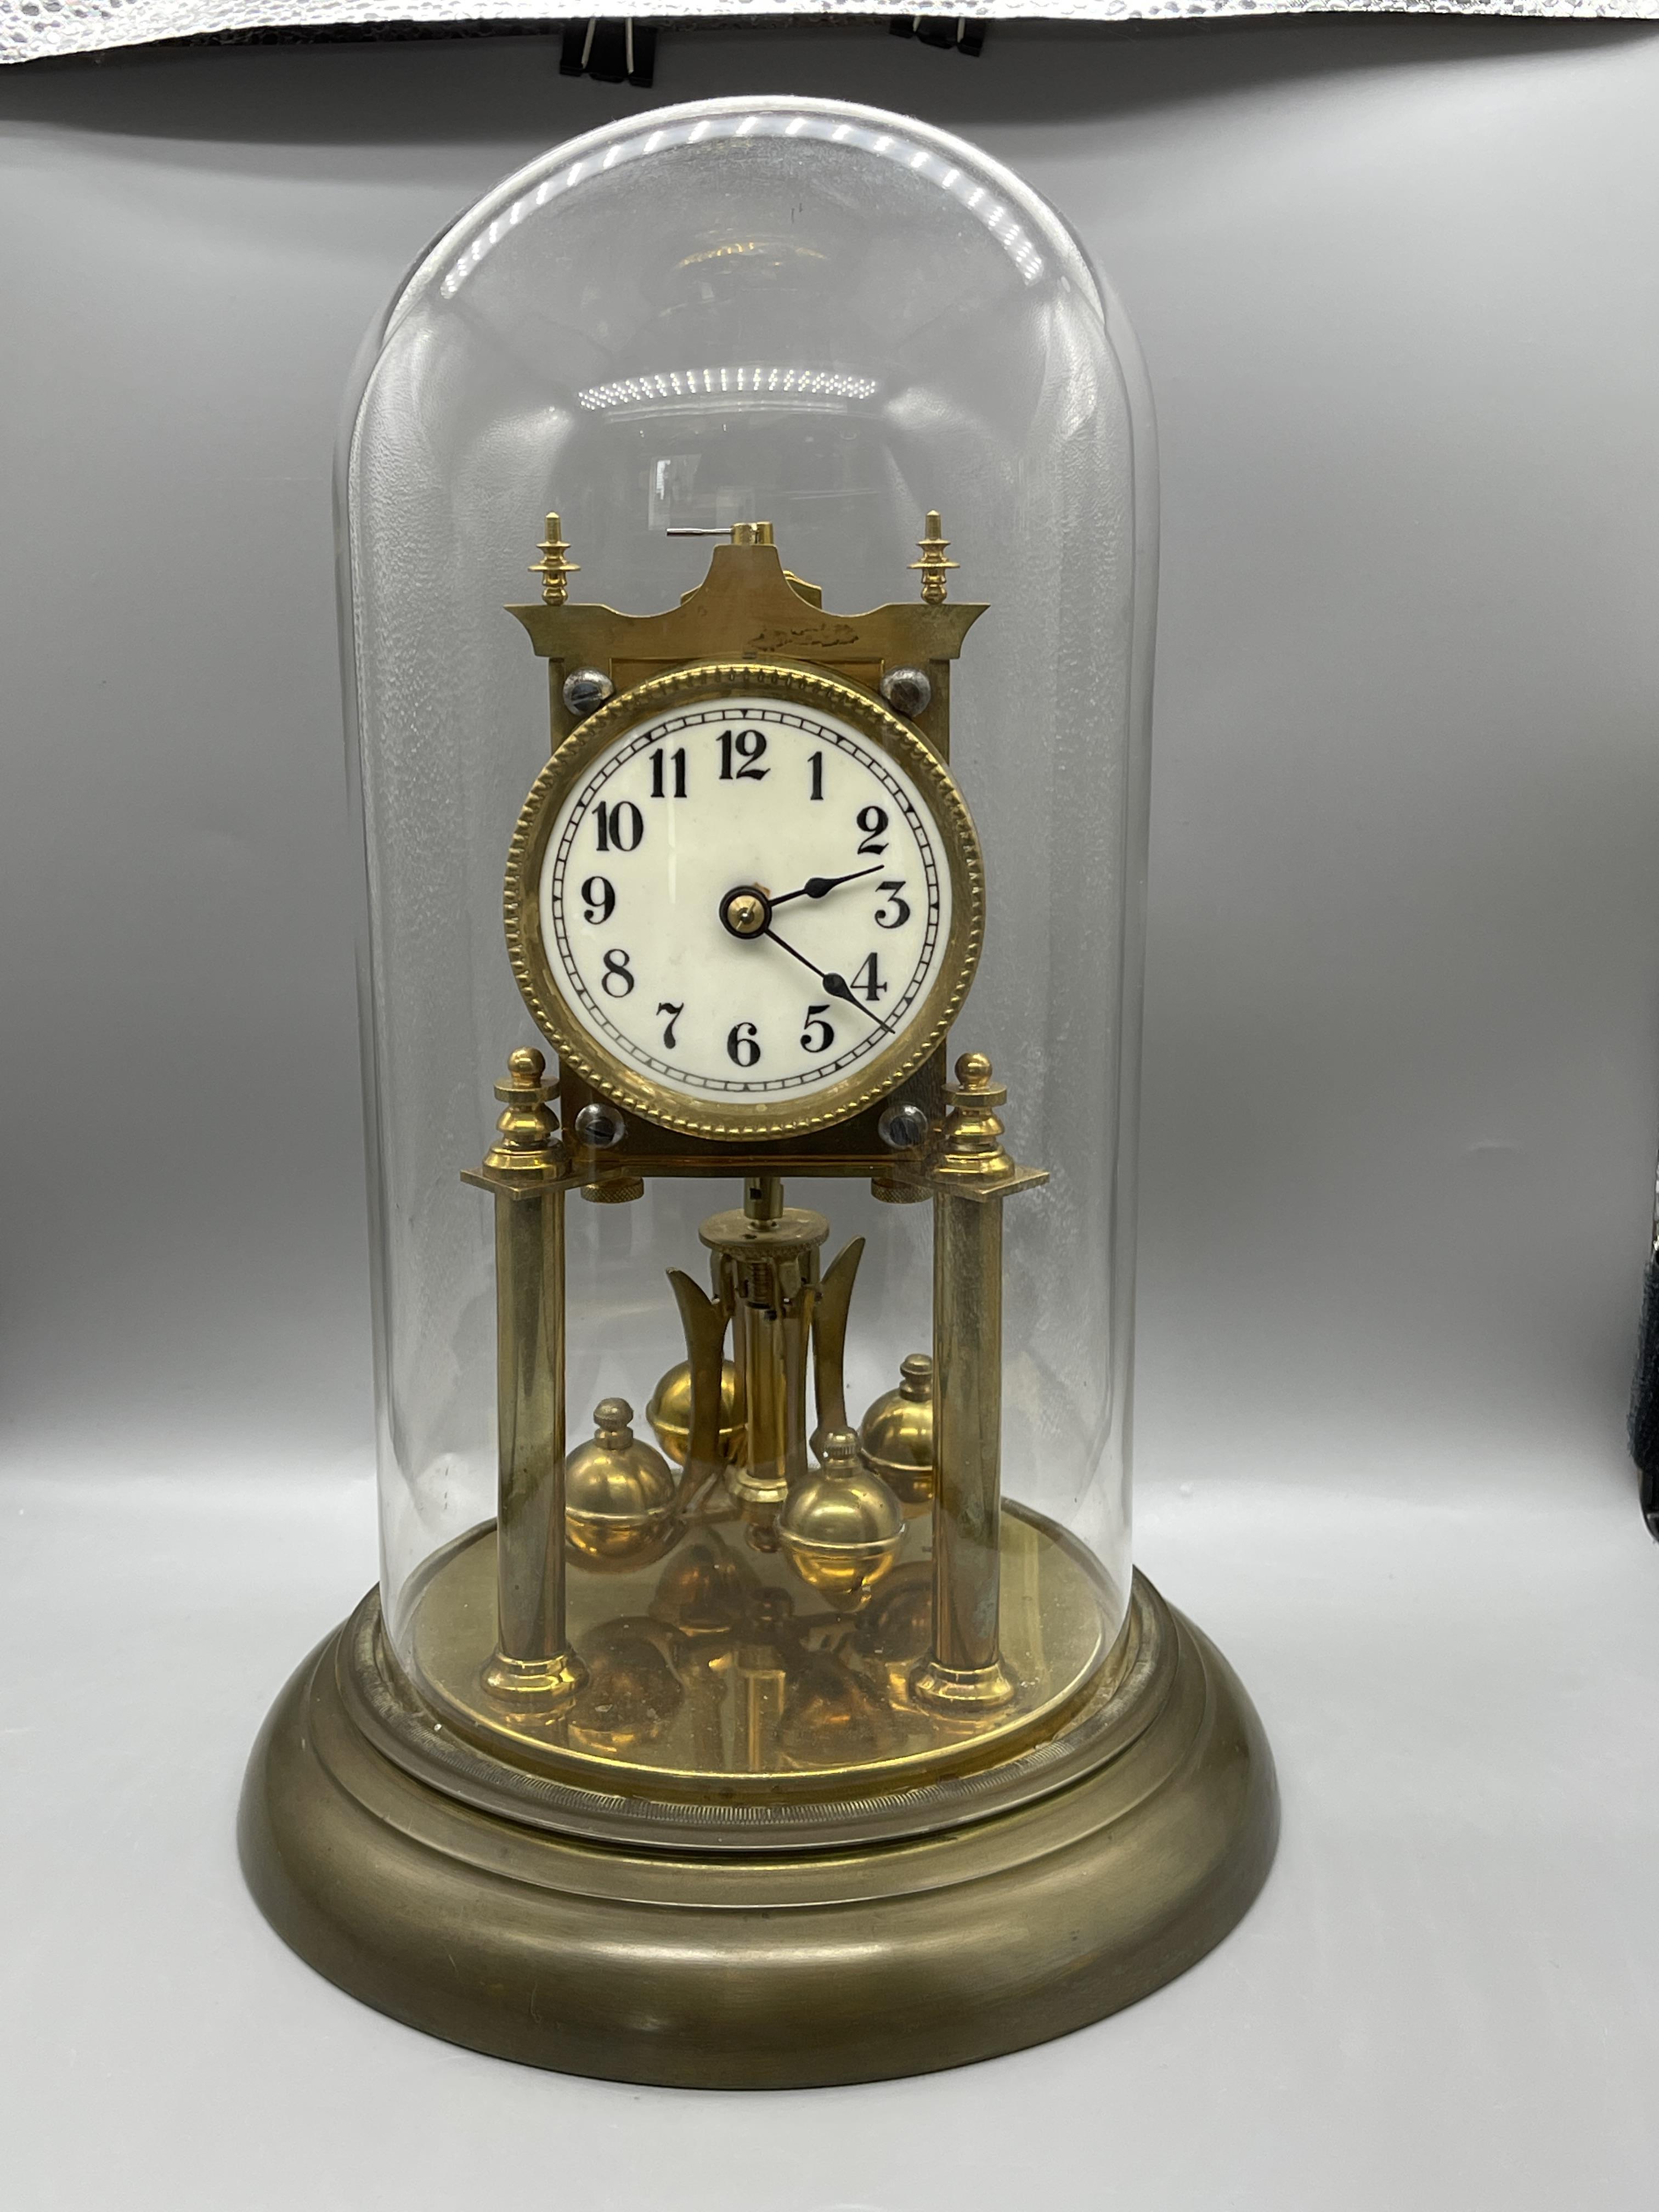 Glass Dome Clock - Image 11 of 11